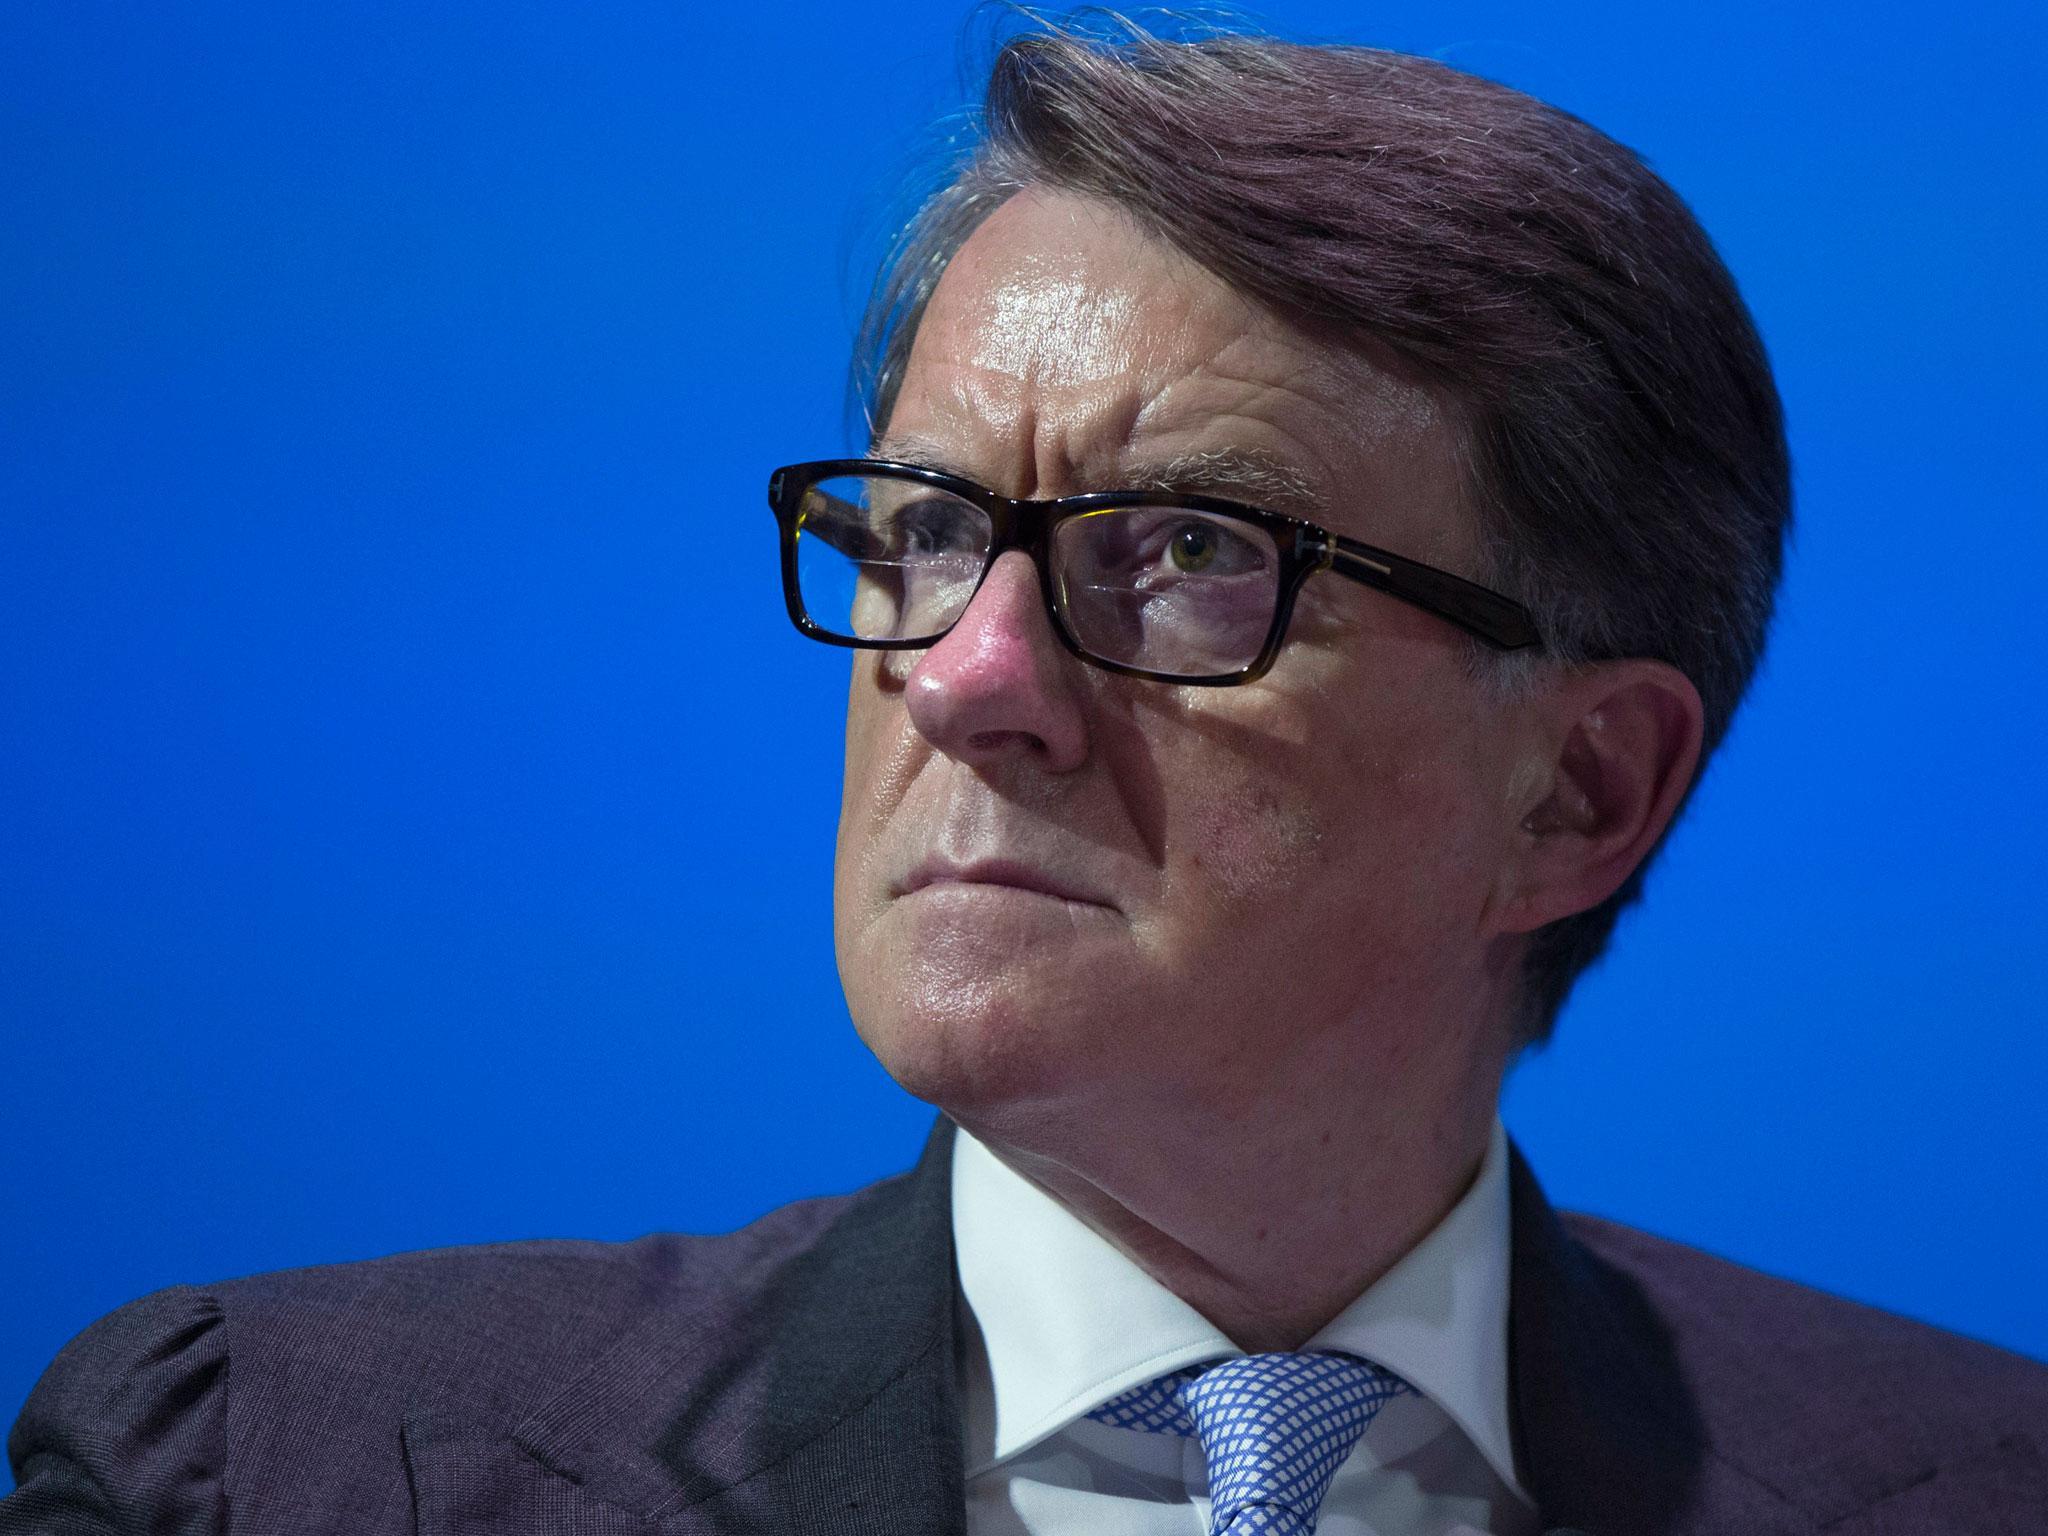 Lord Mandelson, in whose honour the annual event is named